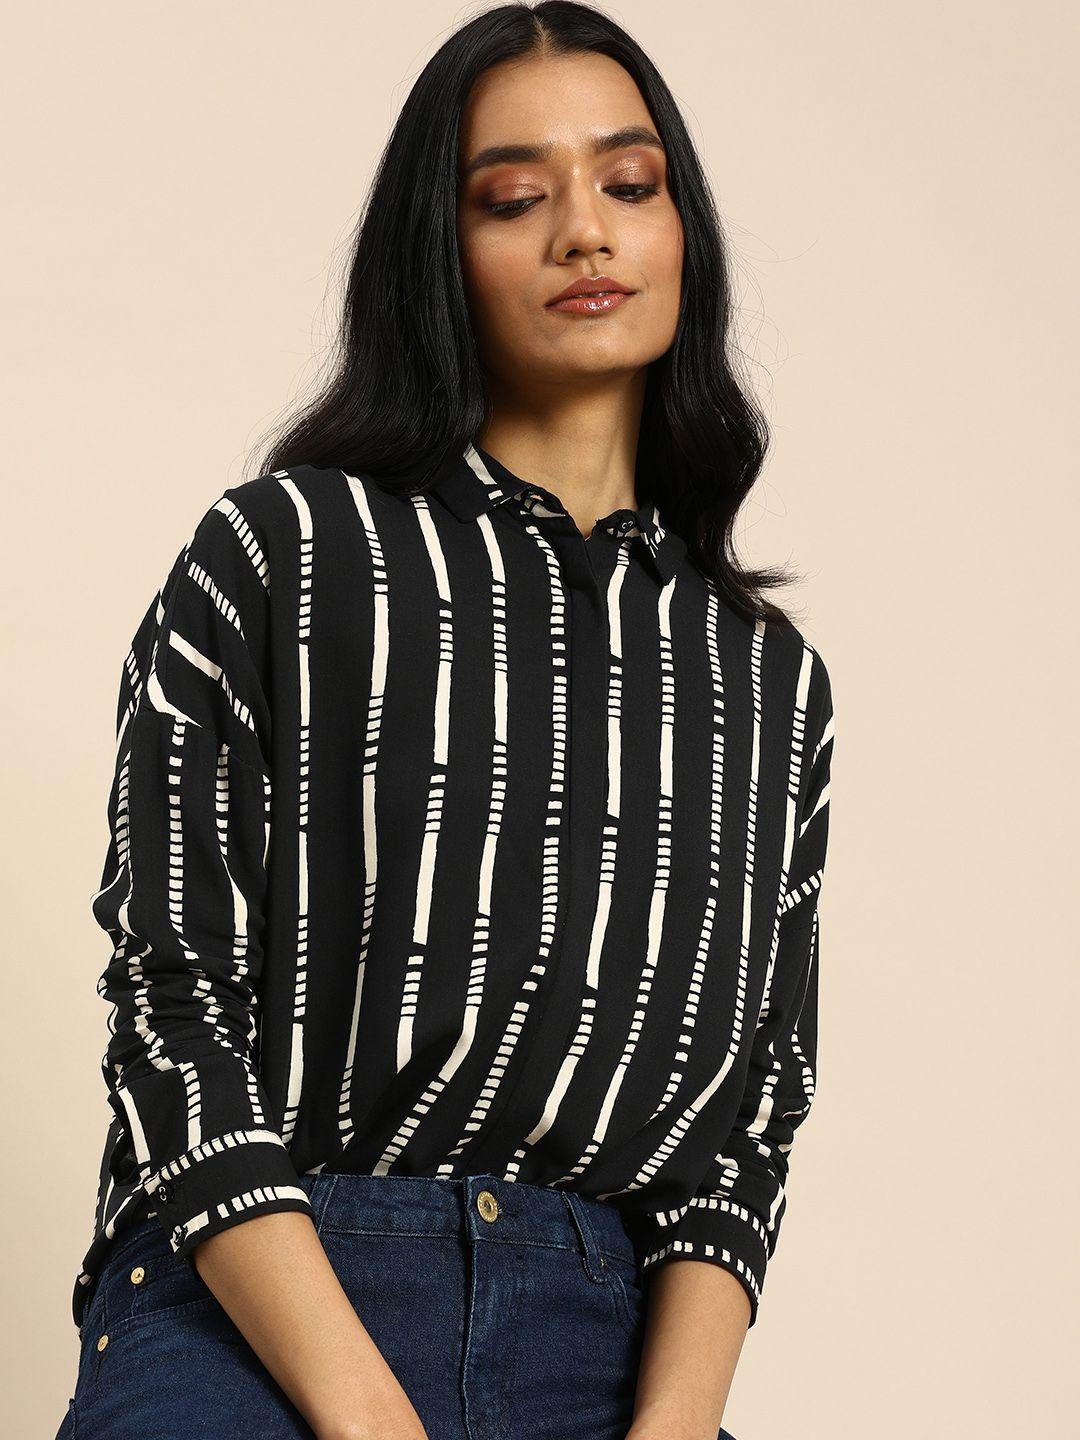 all about you women black & white opaque printed casual shirt